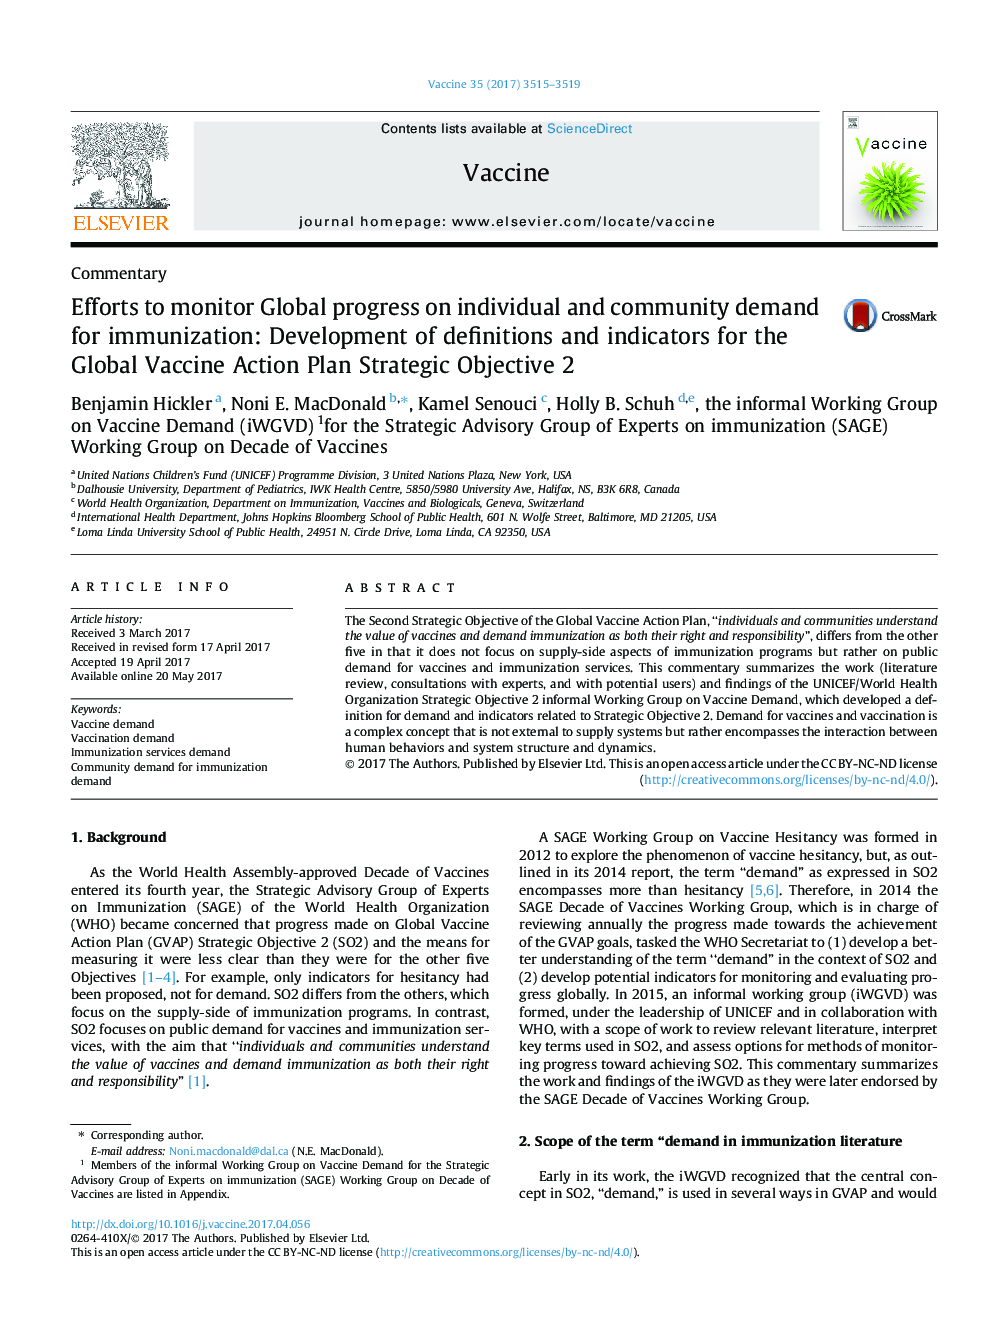 Efforts to monitor Global progress on individual and community demand for immunization: Development of definitions and indicators for the Global Vaccine Action Plan Strategic Objective 2